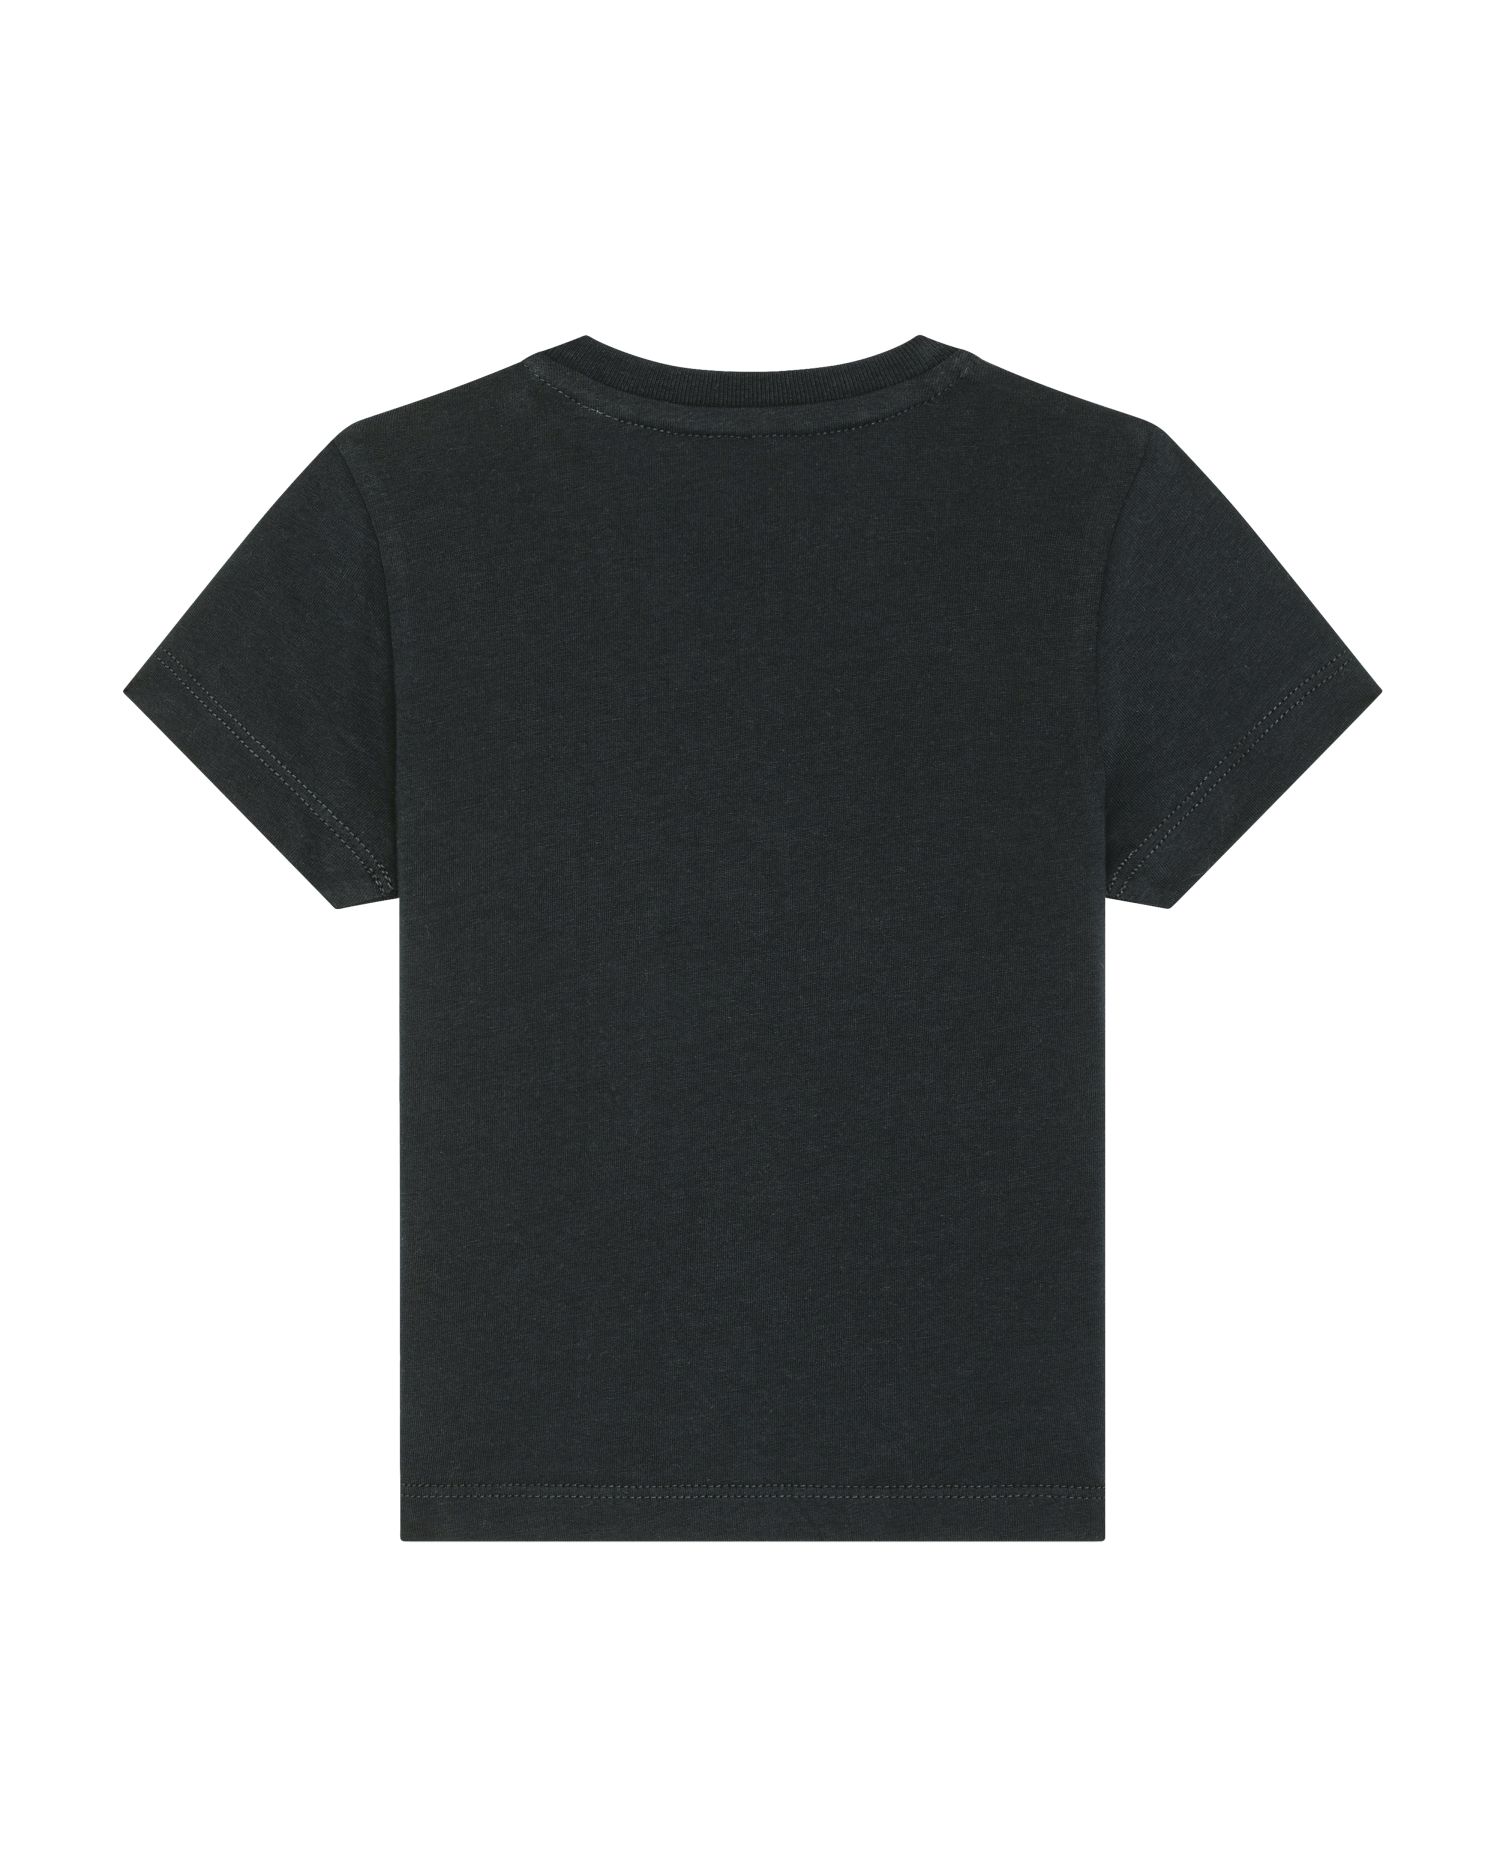 T-Shirt Baby Creator in Farbe Black